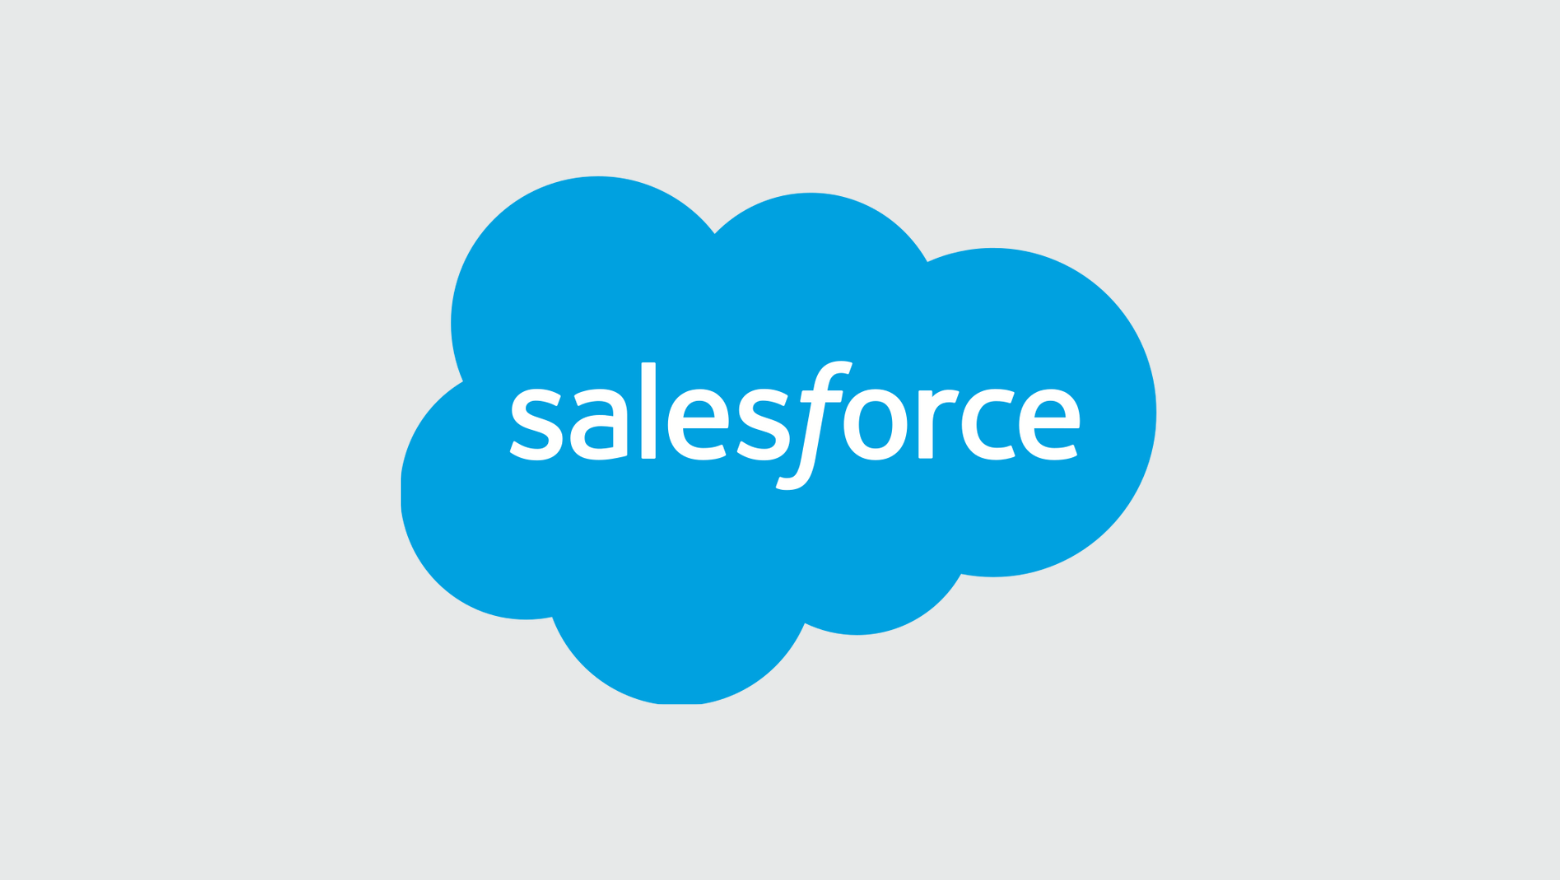 An image of Salesforce's logo, a blue cloud with the word Salesforce written in a dynamic font.